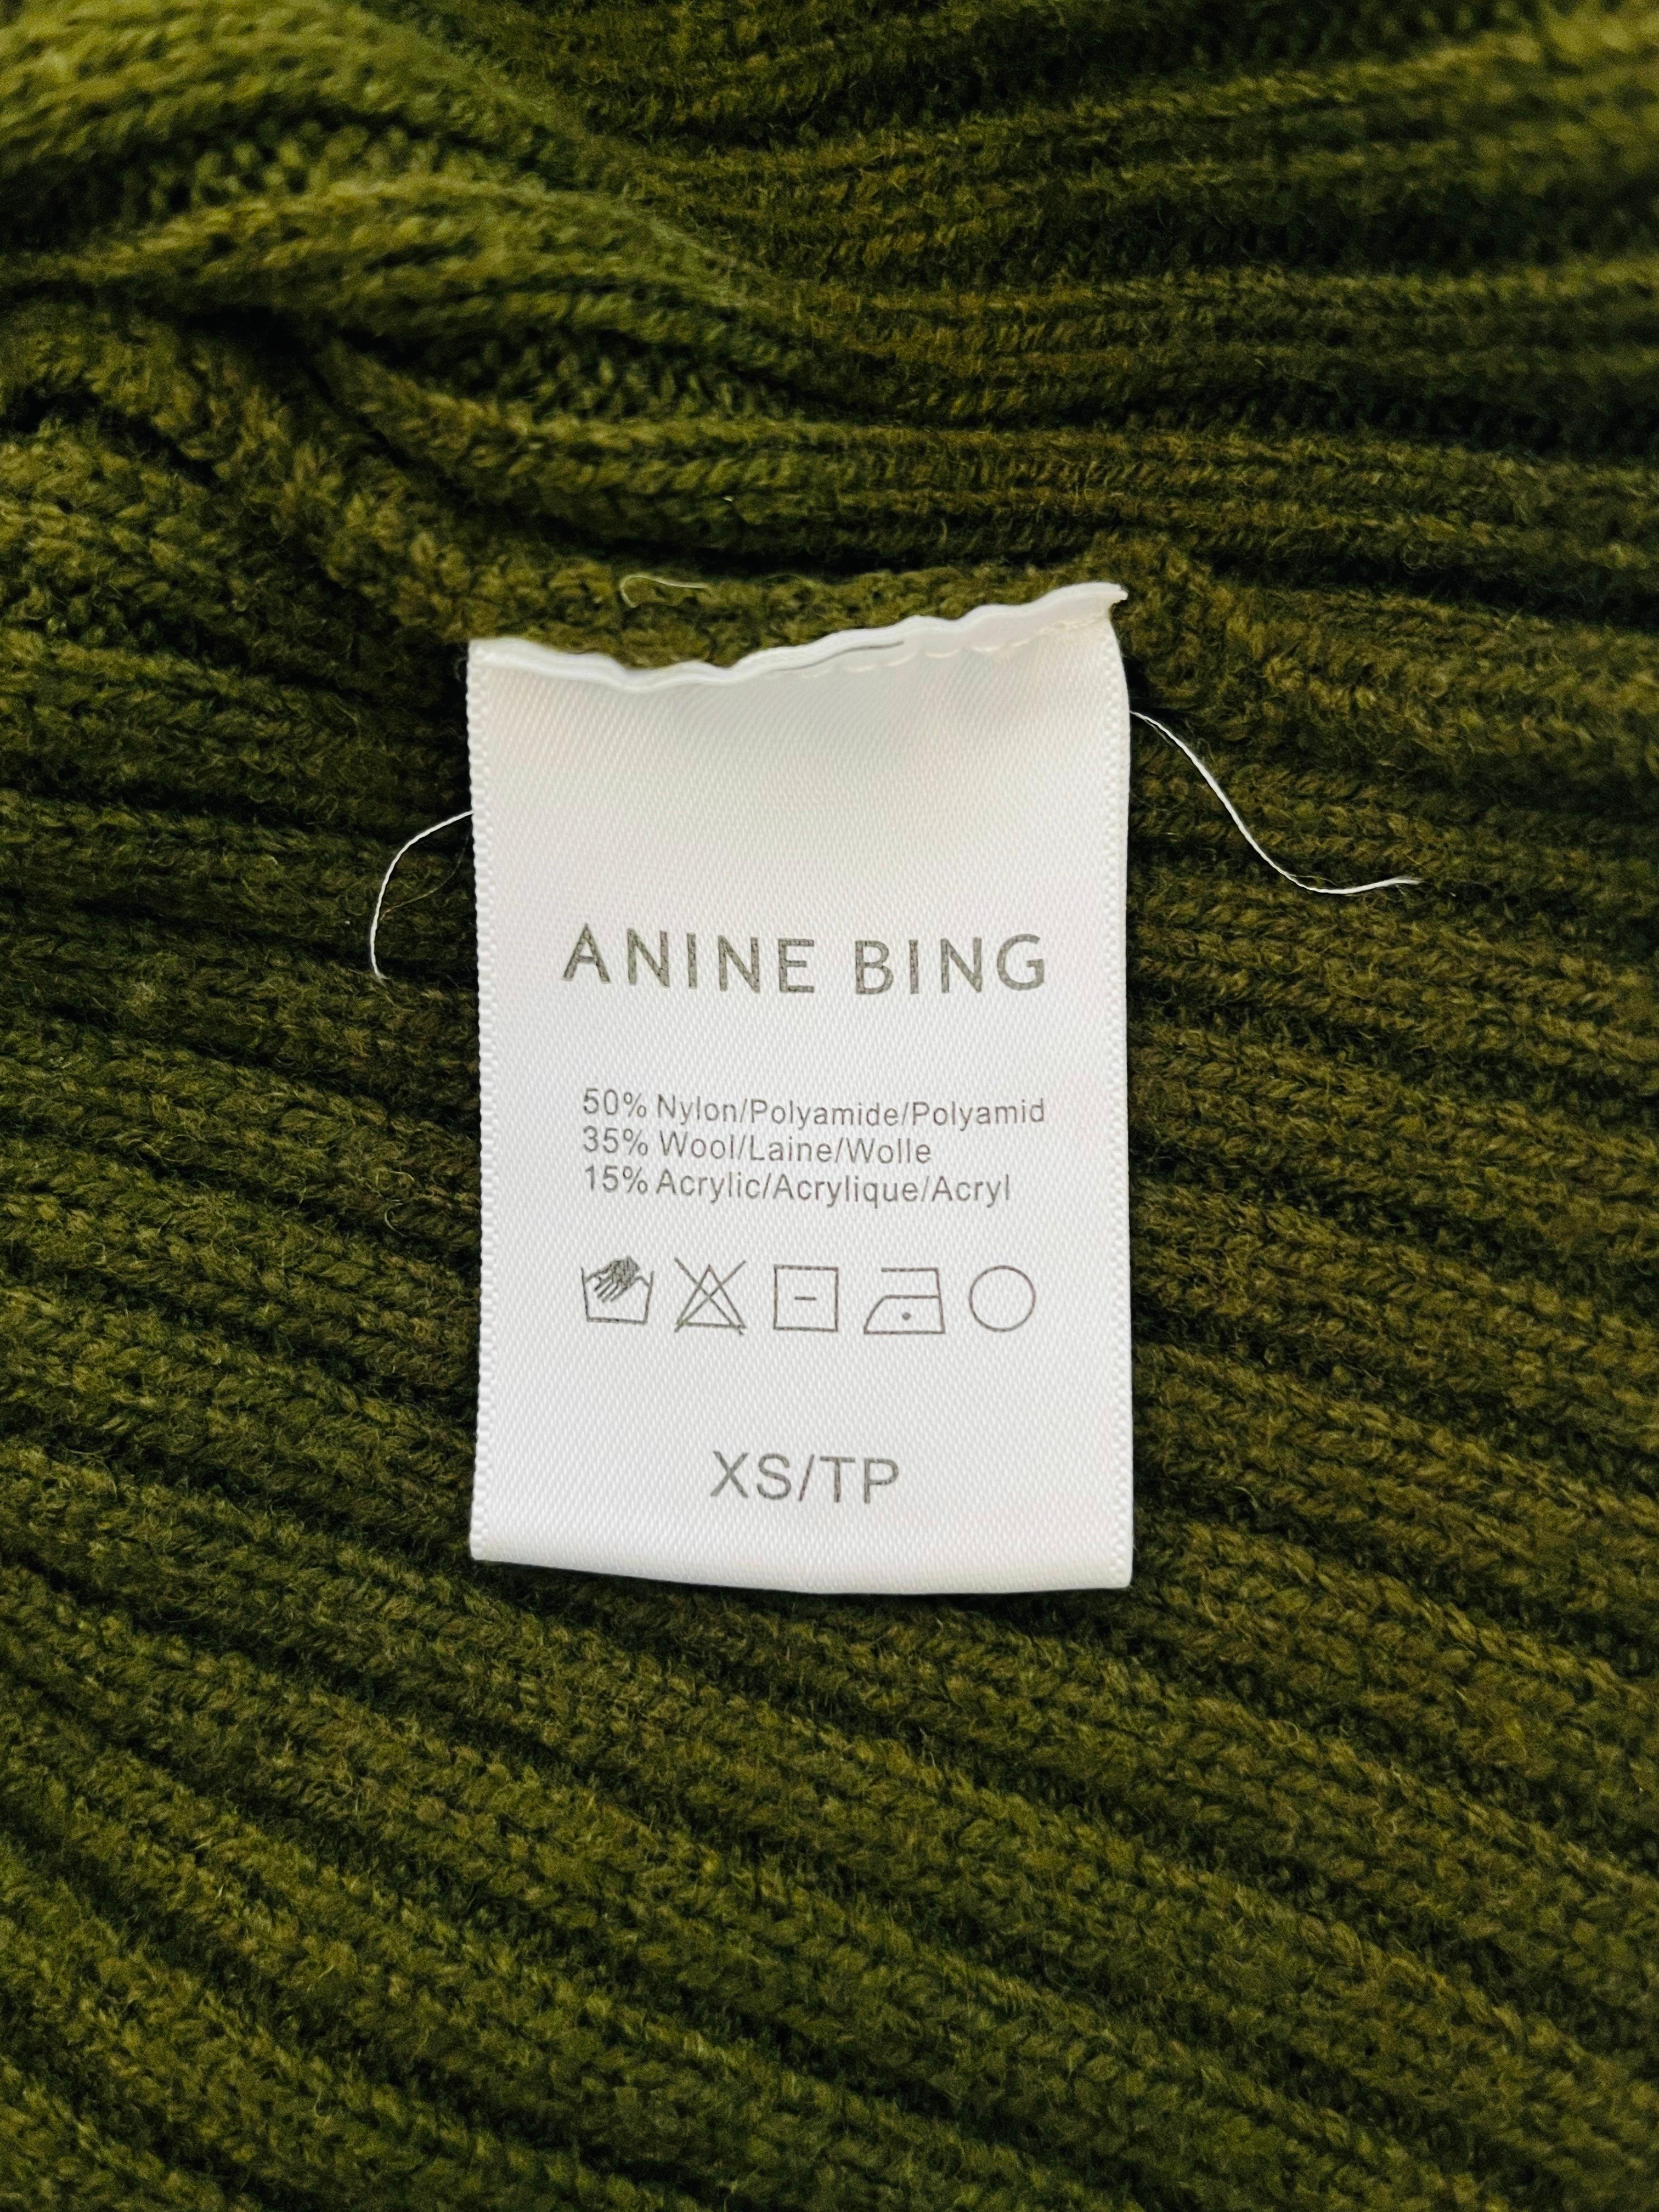 Anine Bing Ribbed Wool Blend Dress For Sale 2